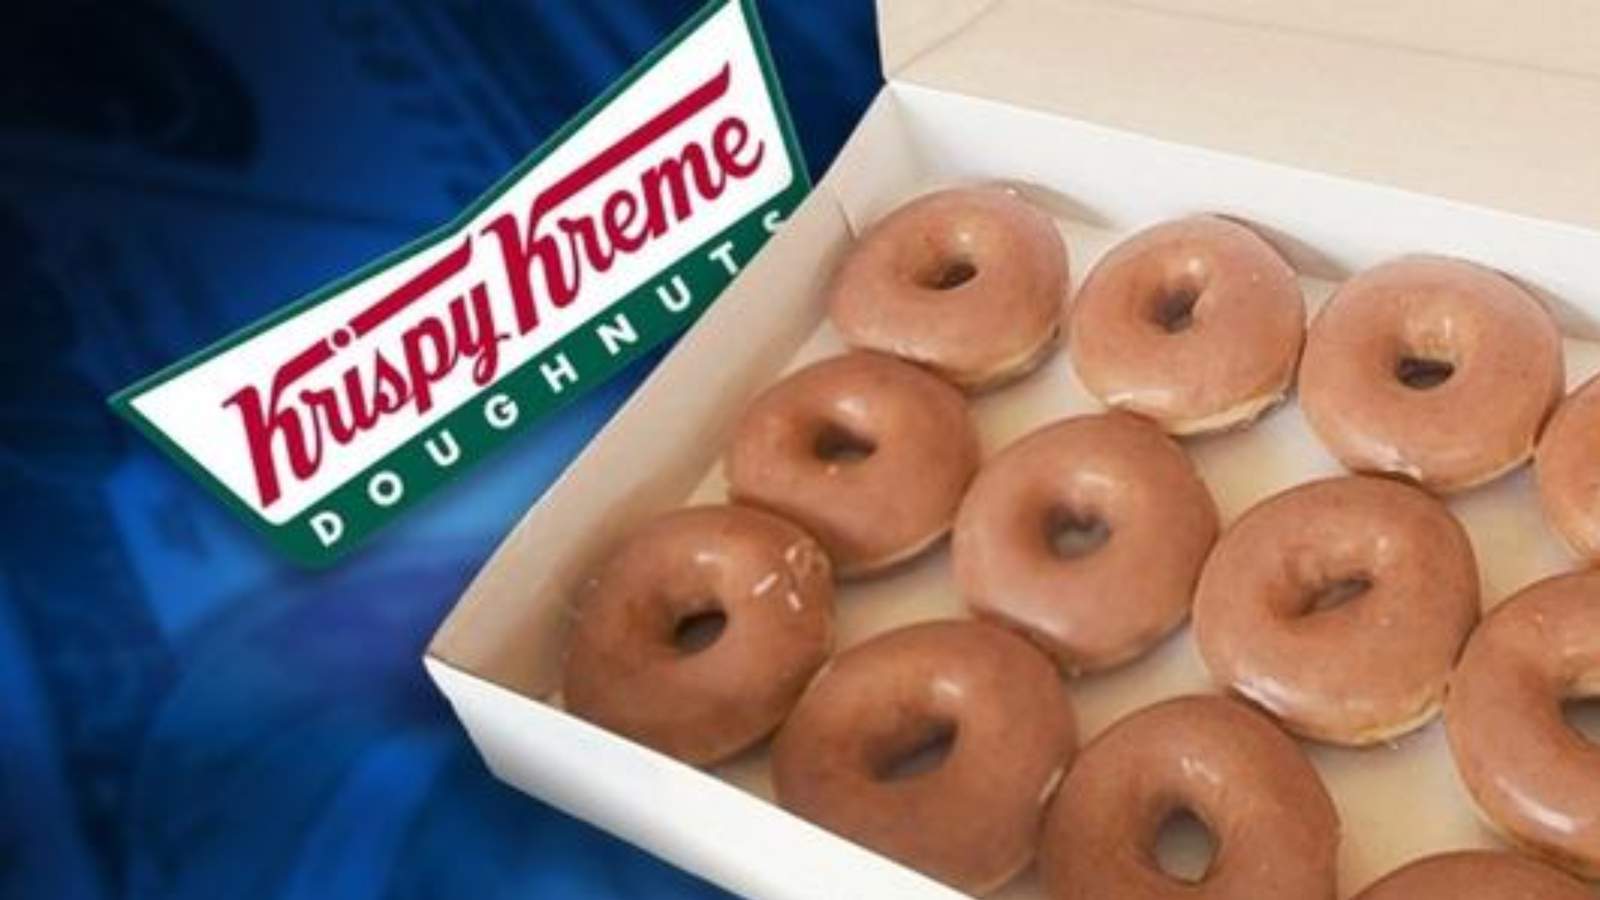 Krispy Kreme is giving a free donut to everyone on election day